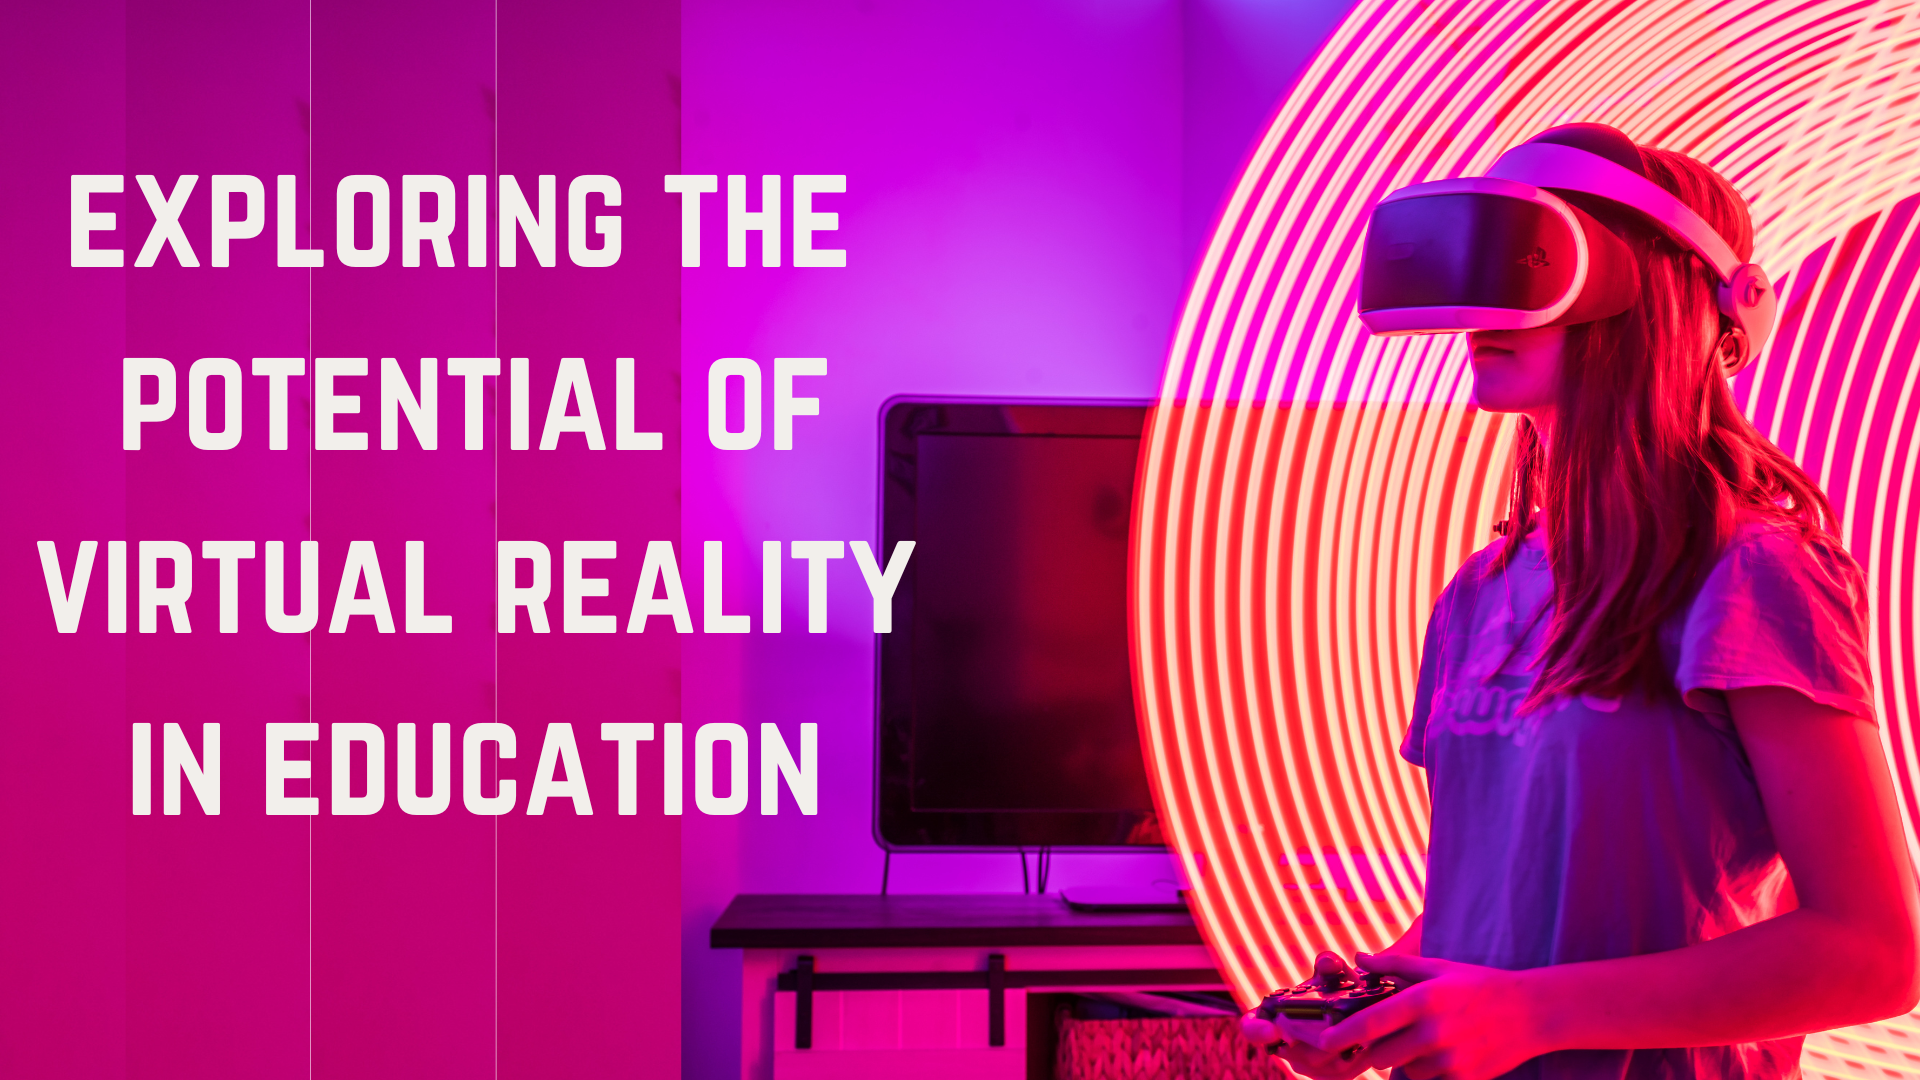 Transforming education with virtual reality